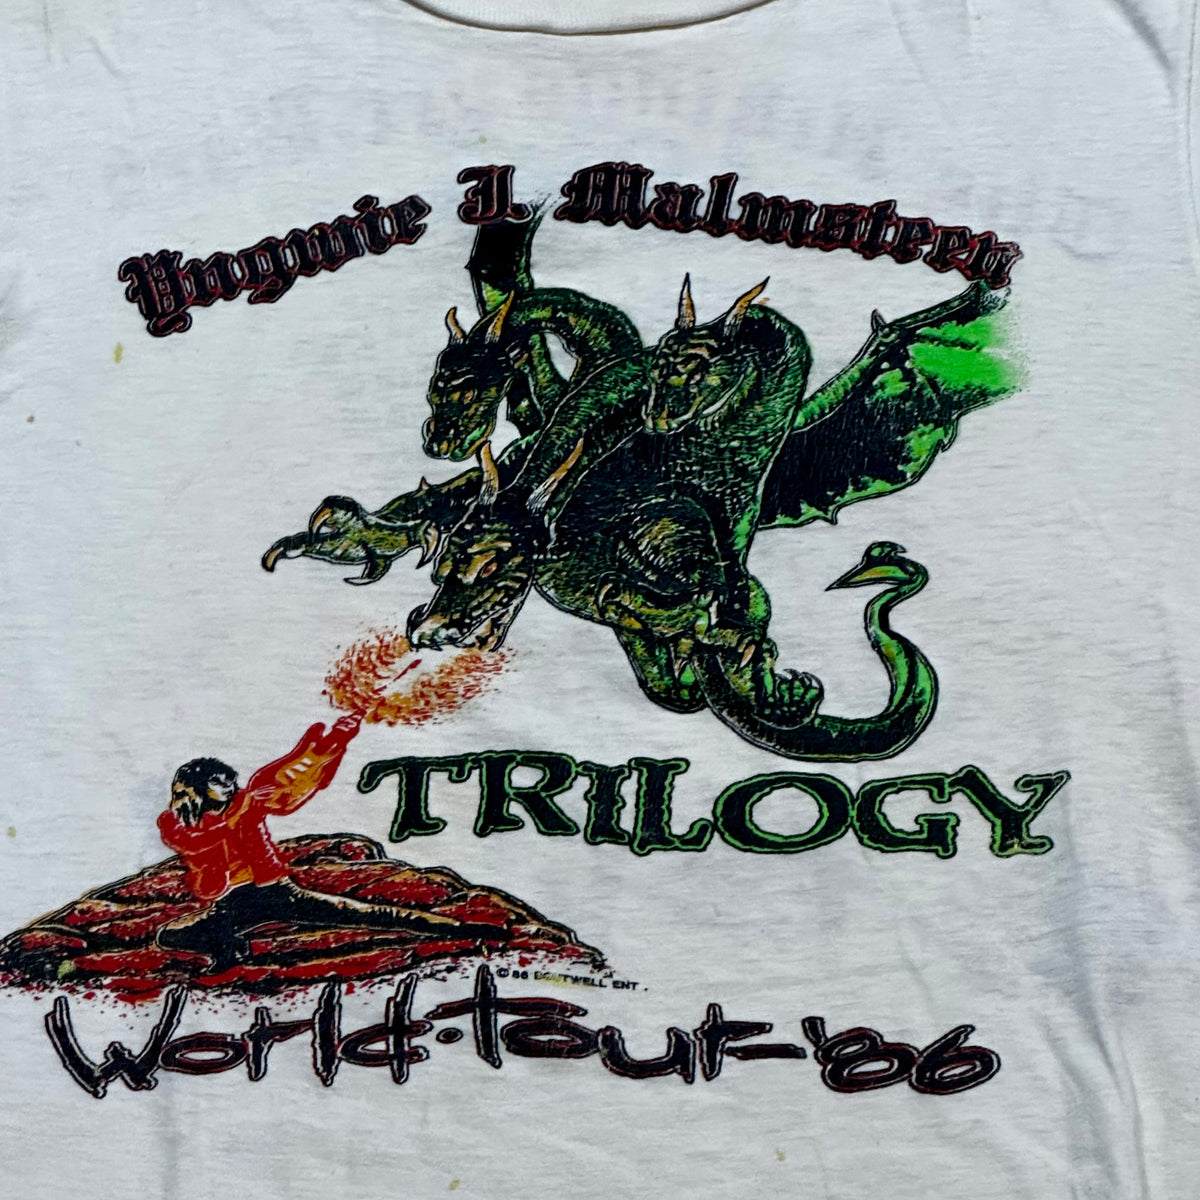 1986 Vintage Yngwie Malmsteen Trilogy "The Vikings are back" world tour shirt